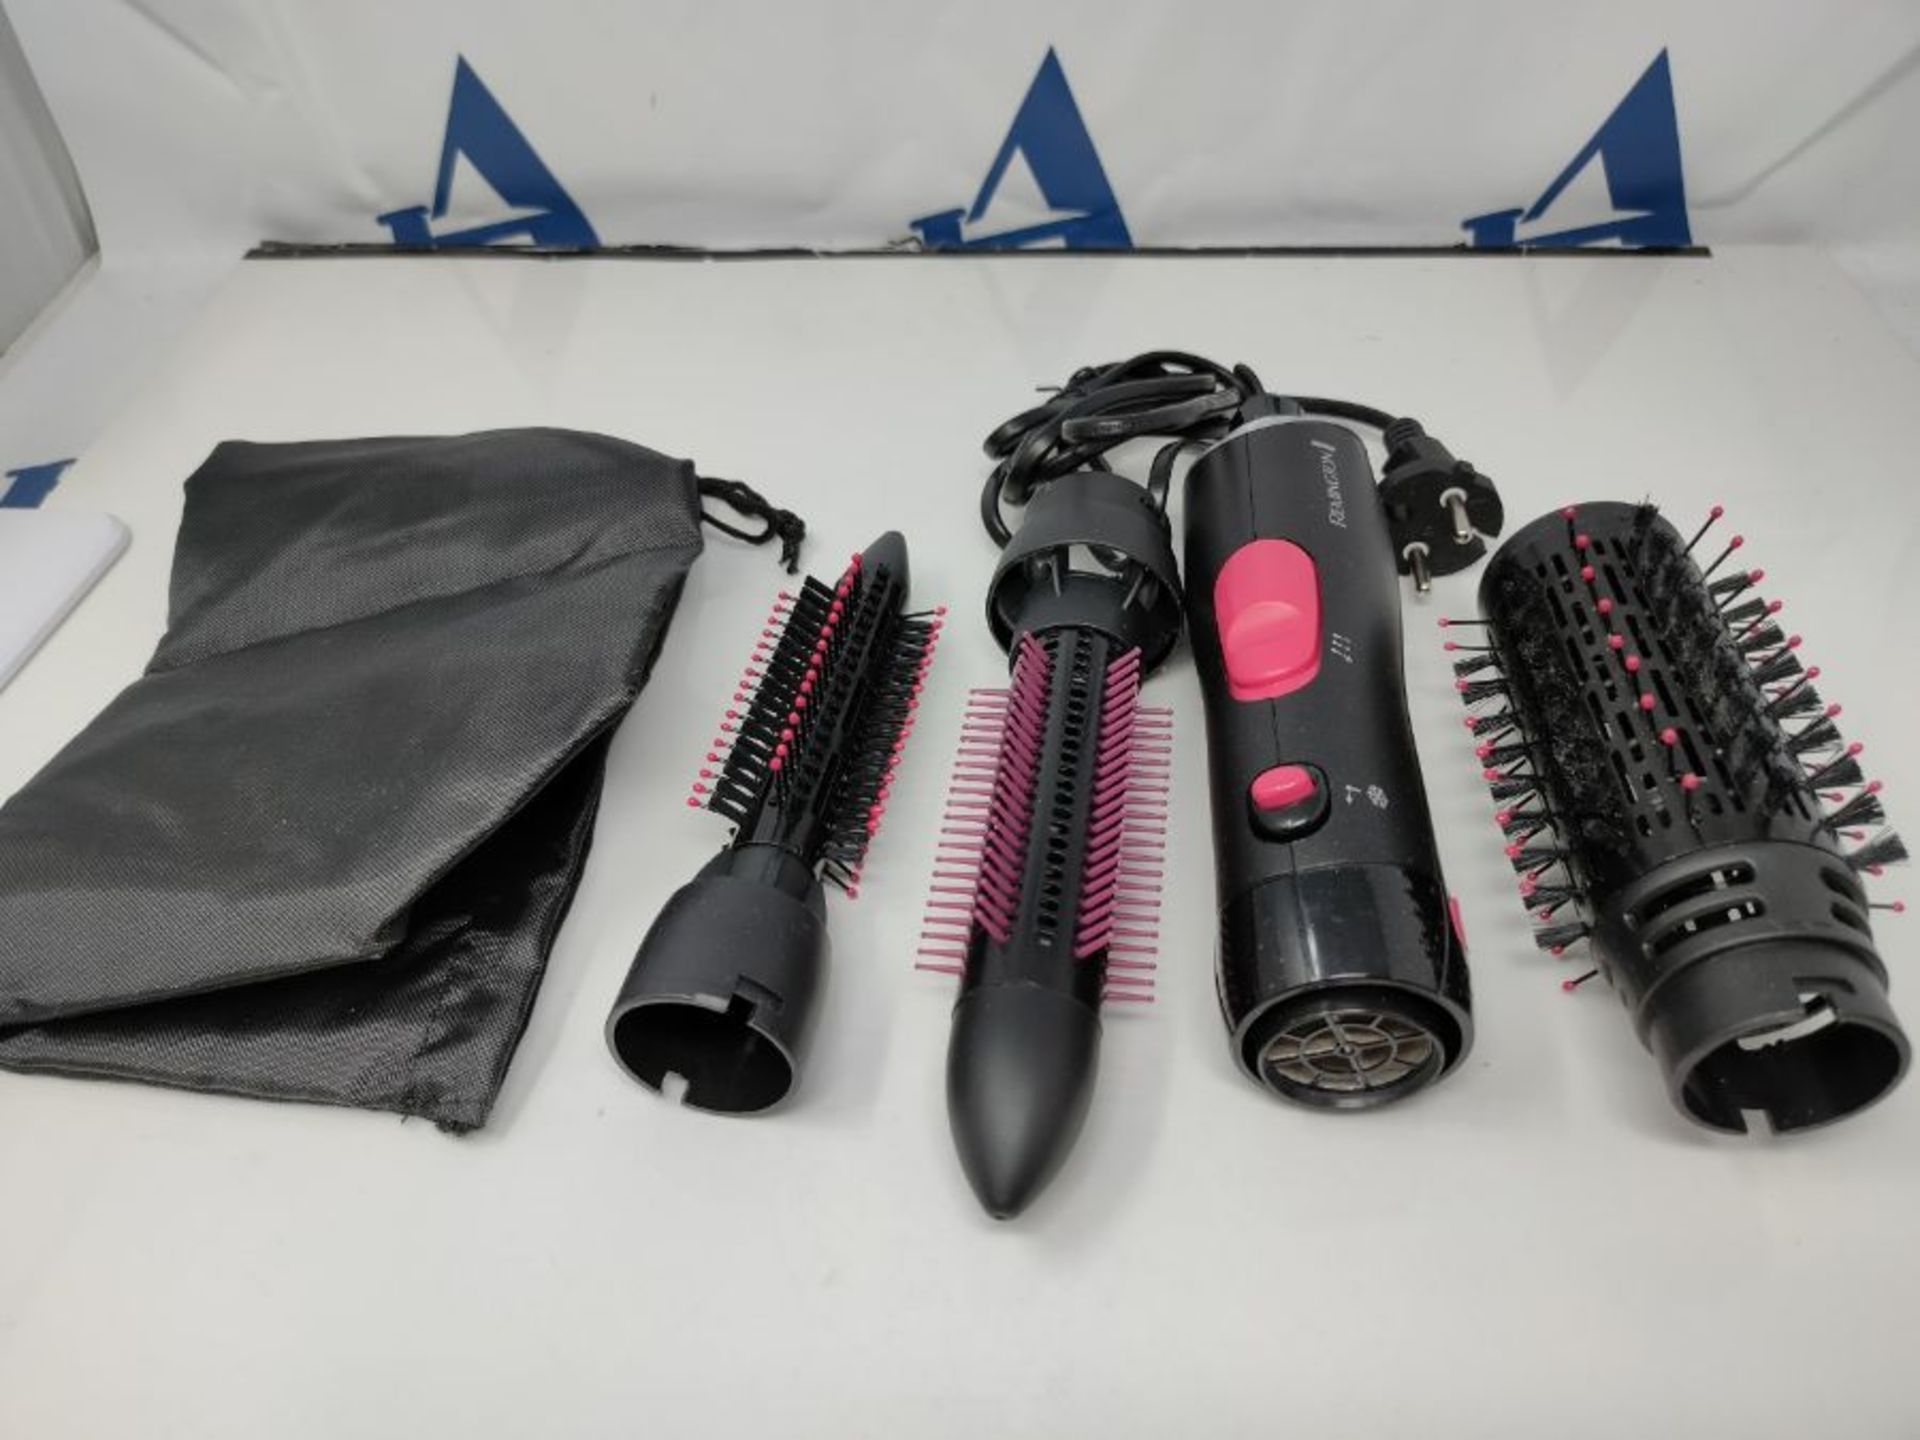 Remington AS7051 Volume and Curl Air Styler, Black/ Pink - Image 3 of 3